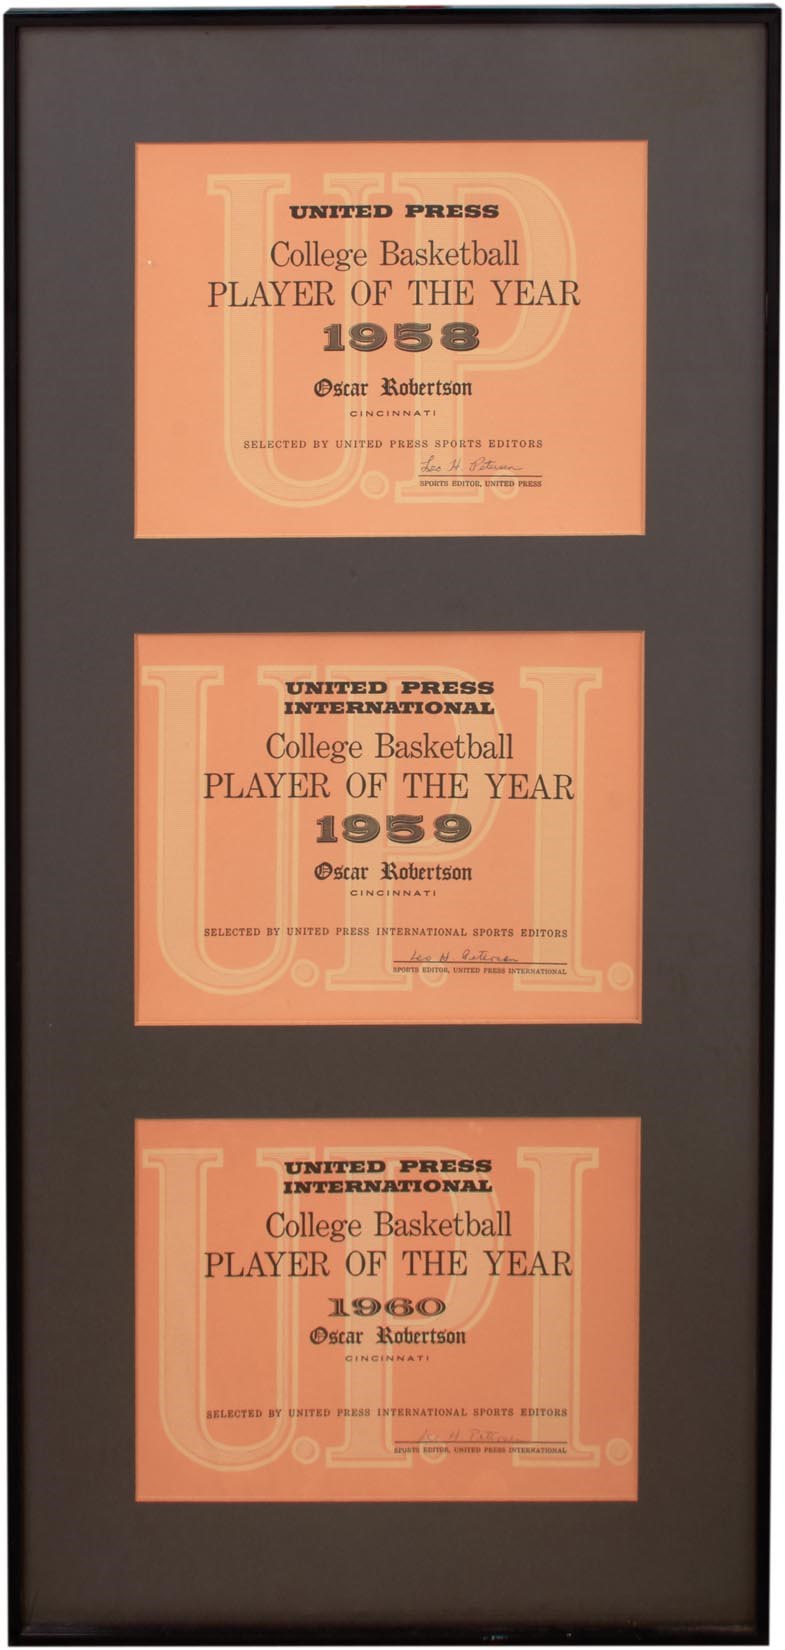 The Oscar Robertson Collection - 1958, 1959 and 1960 Oscar Robertson UPI College Player of the Year Awards